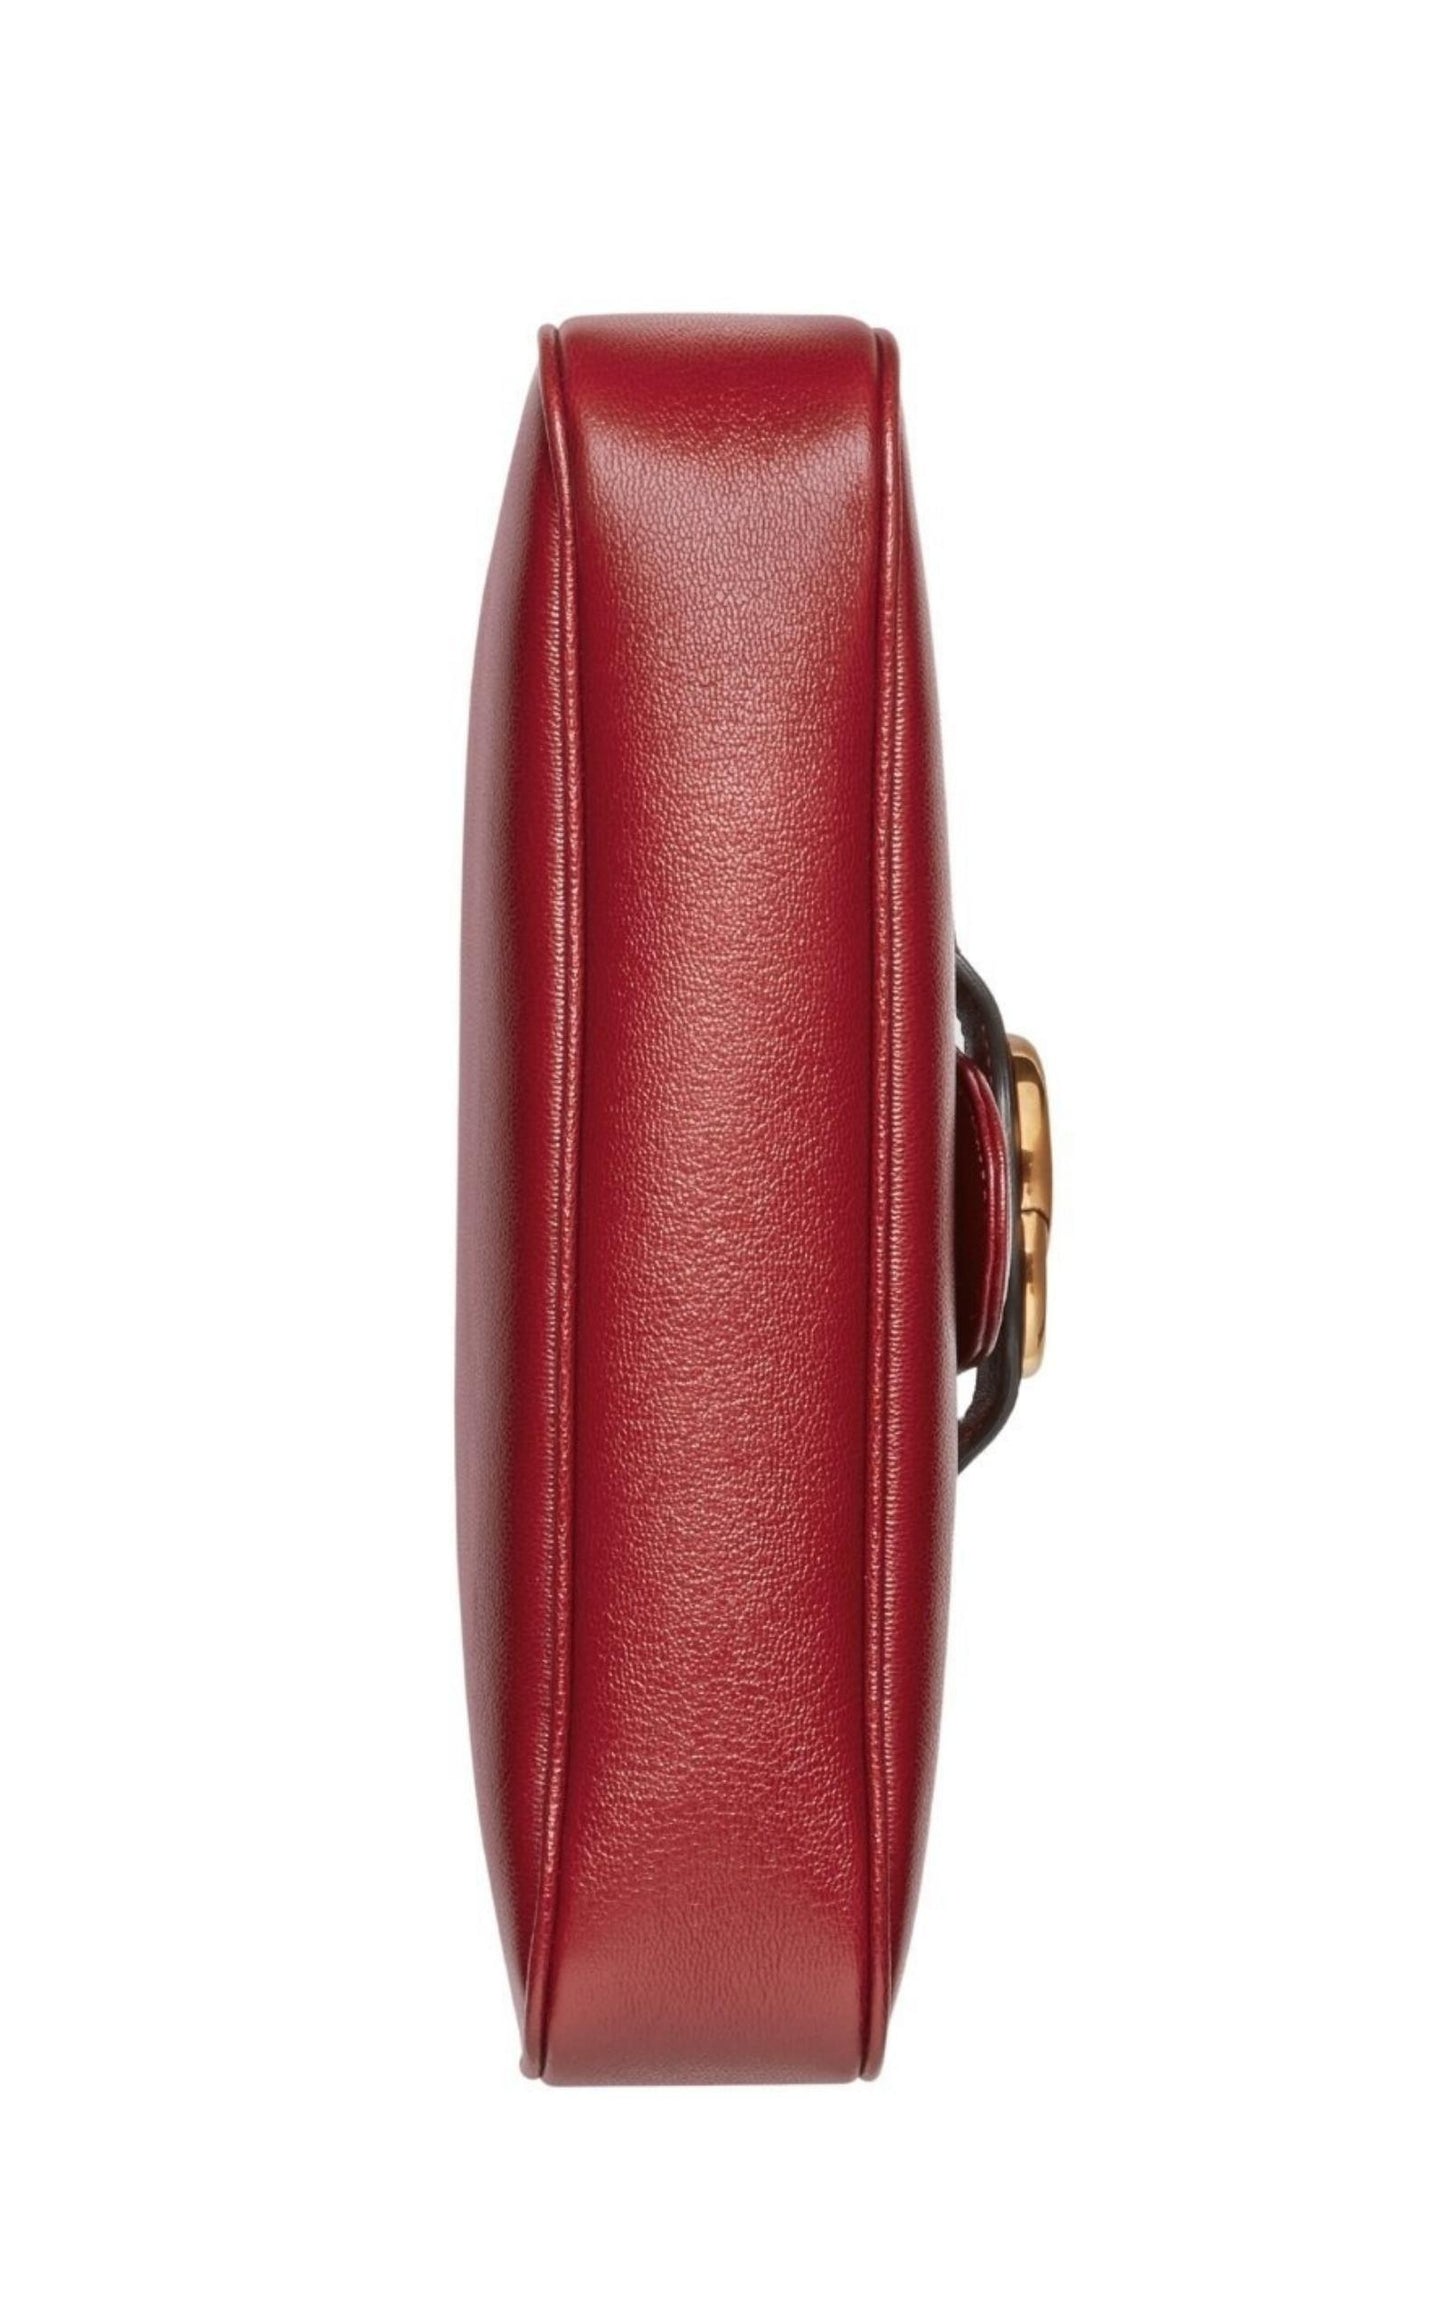 Gucci Small Messenger with Double GG Bag in Red